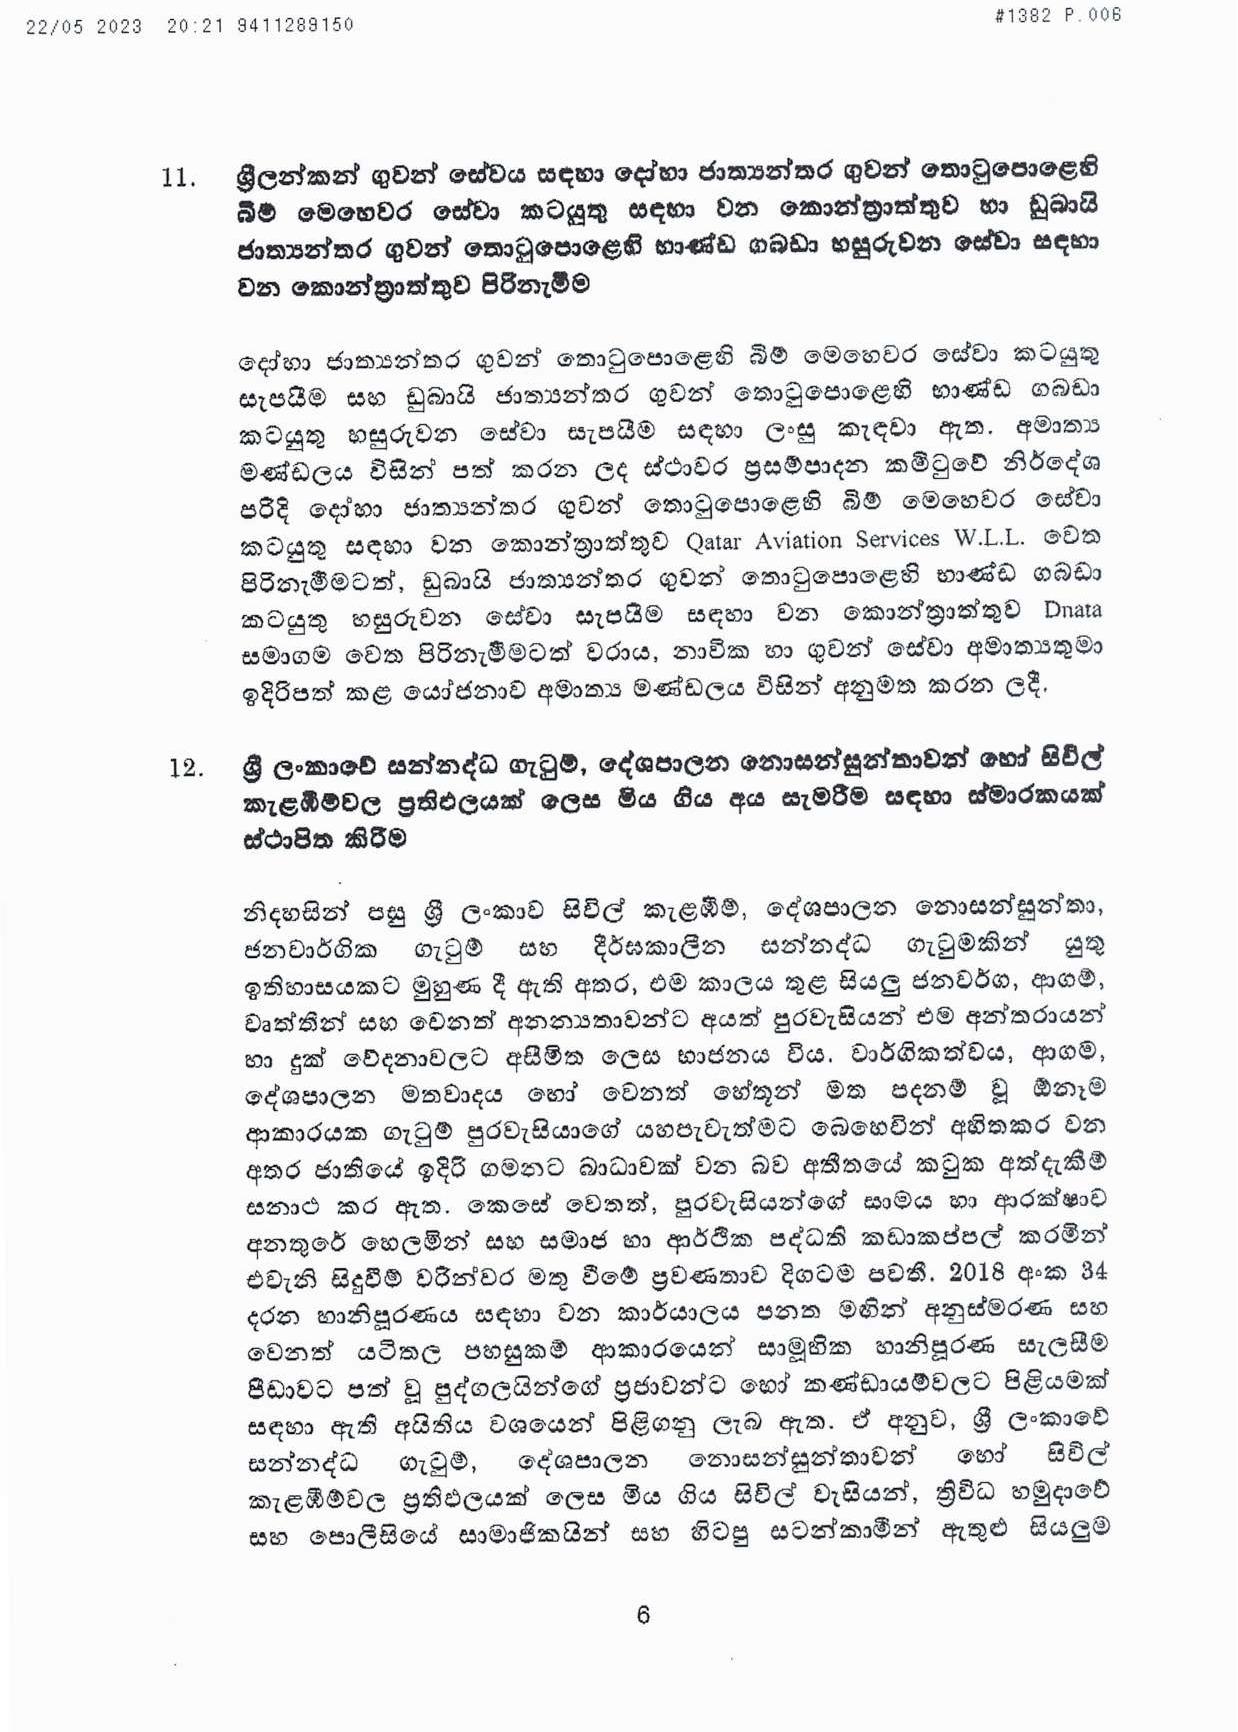 Cabinet Decisions on 22.05.2023 page 006